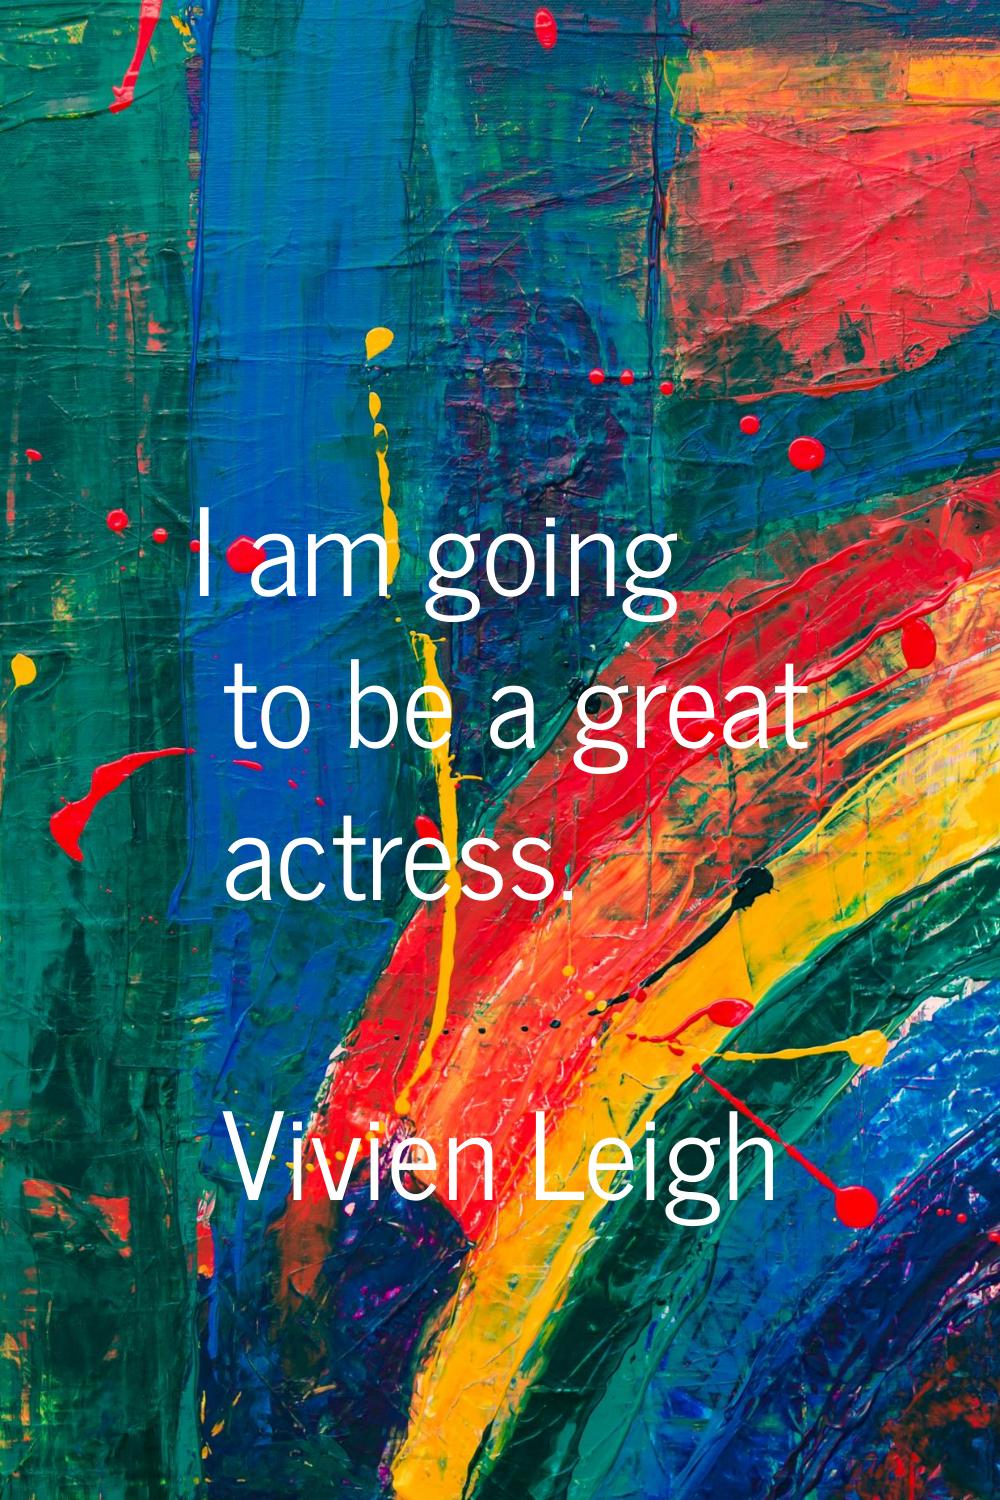 I am going to be a great actress.